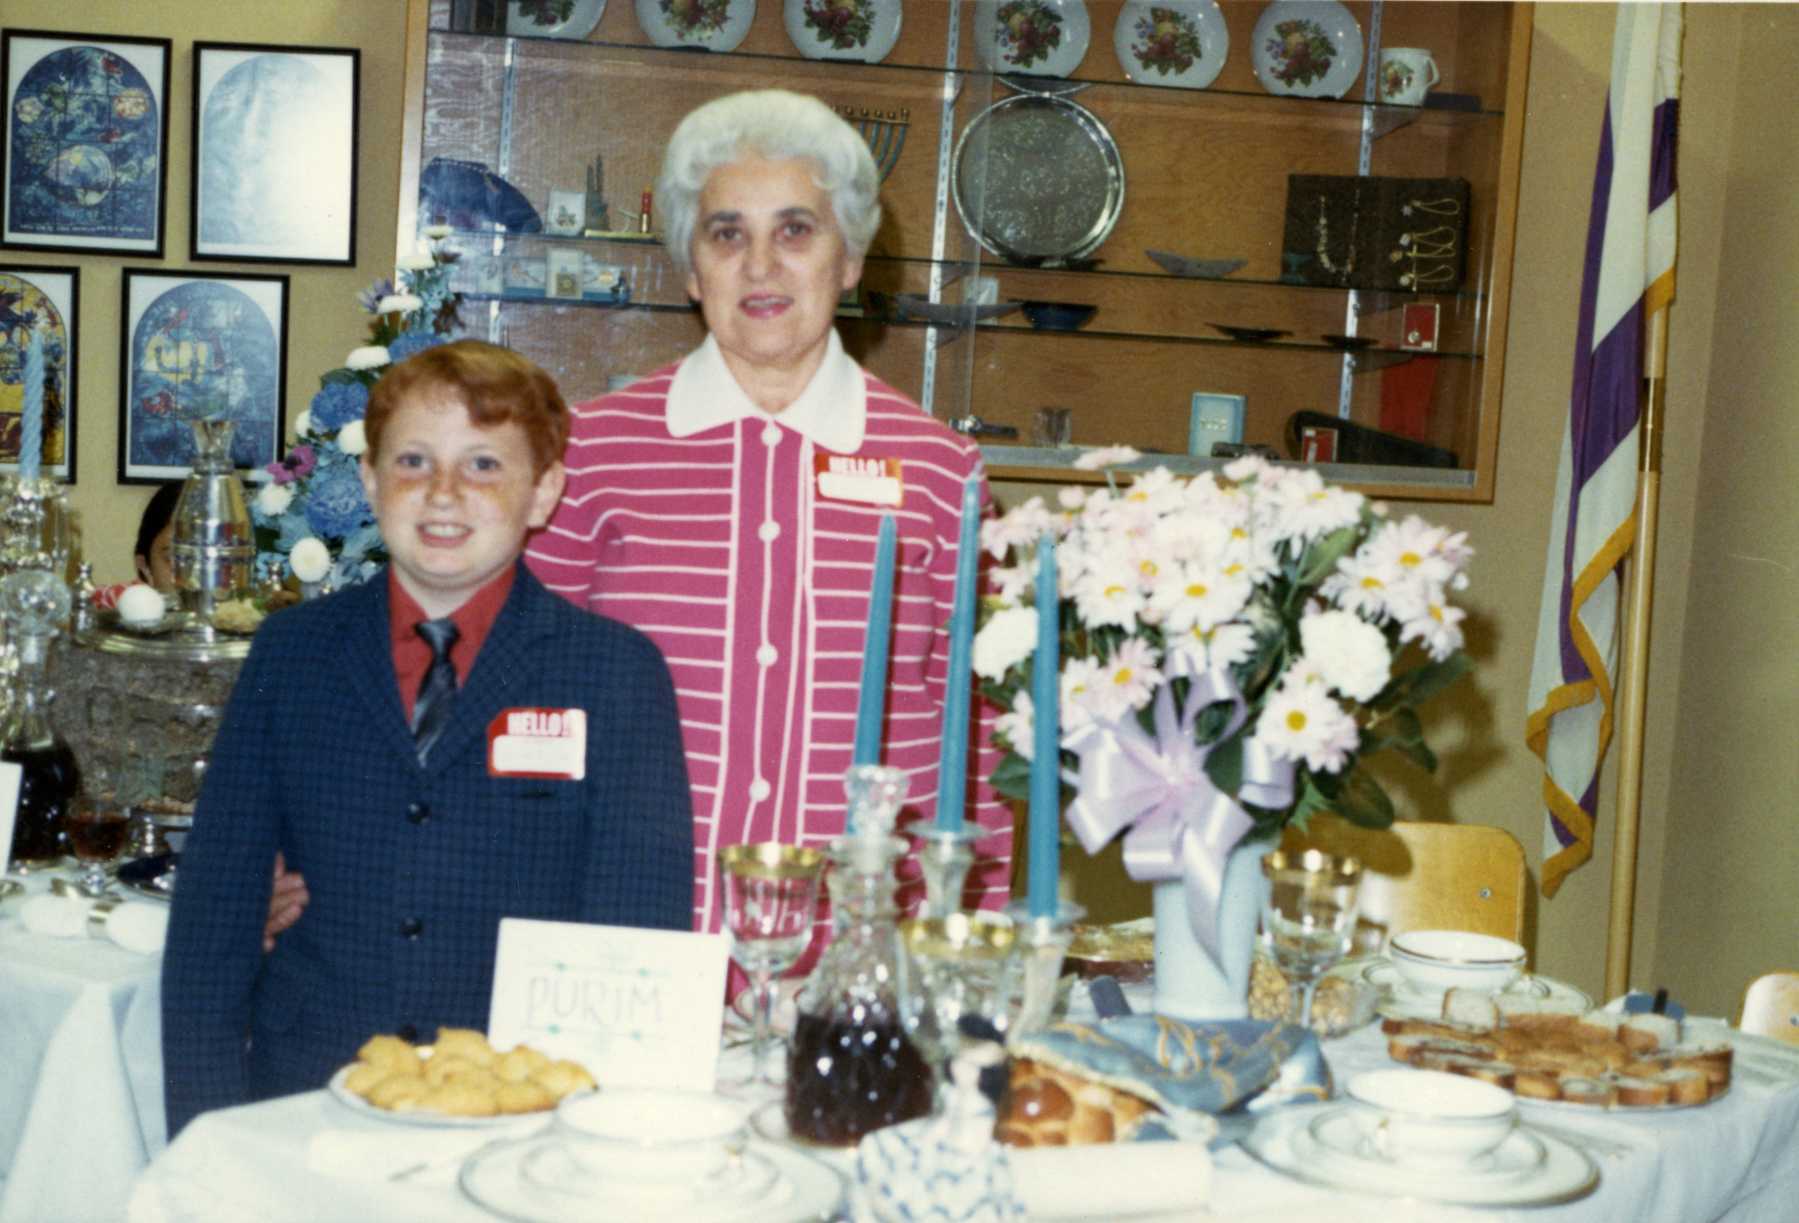 Pictured from left to right: David Muller and Fannie Bogomolny.